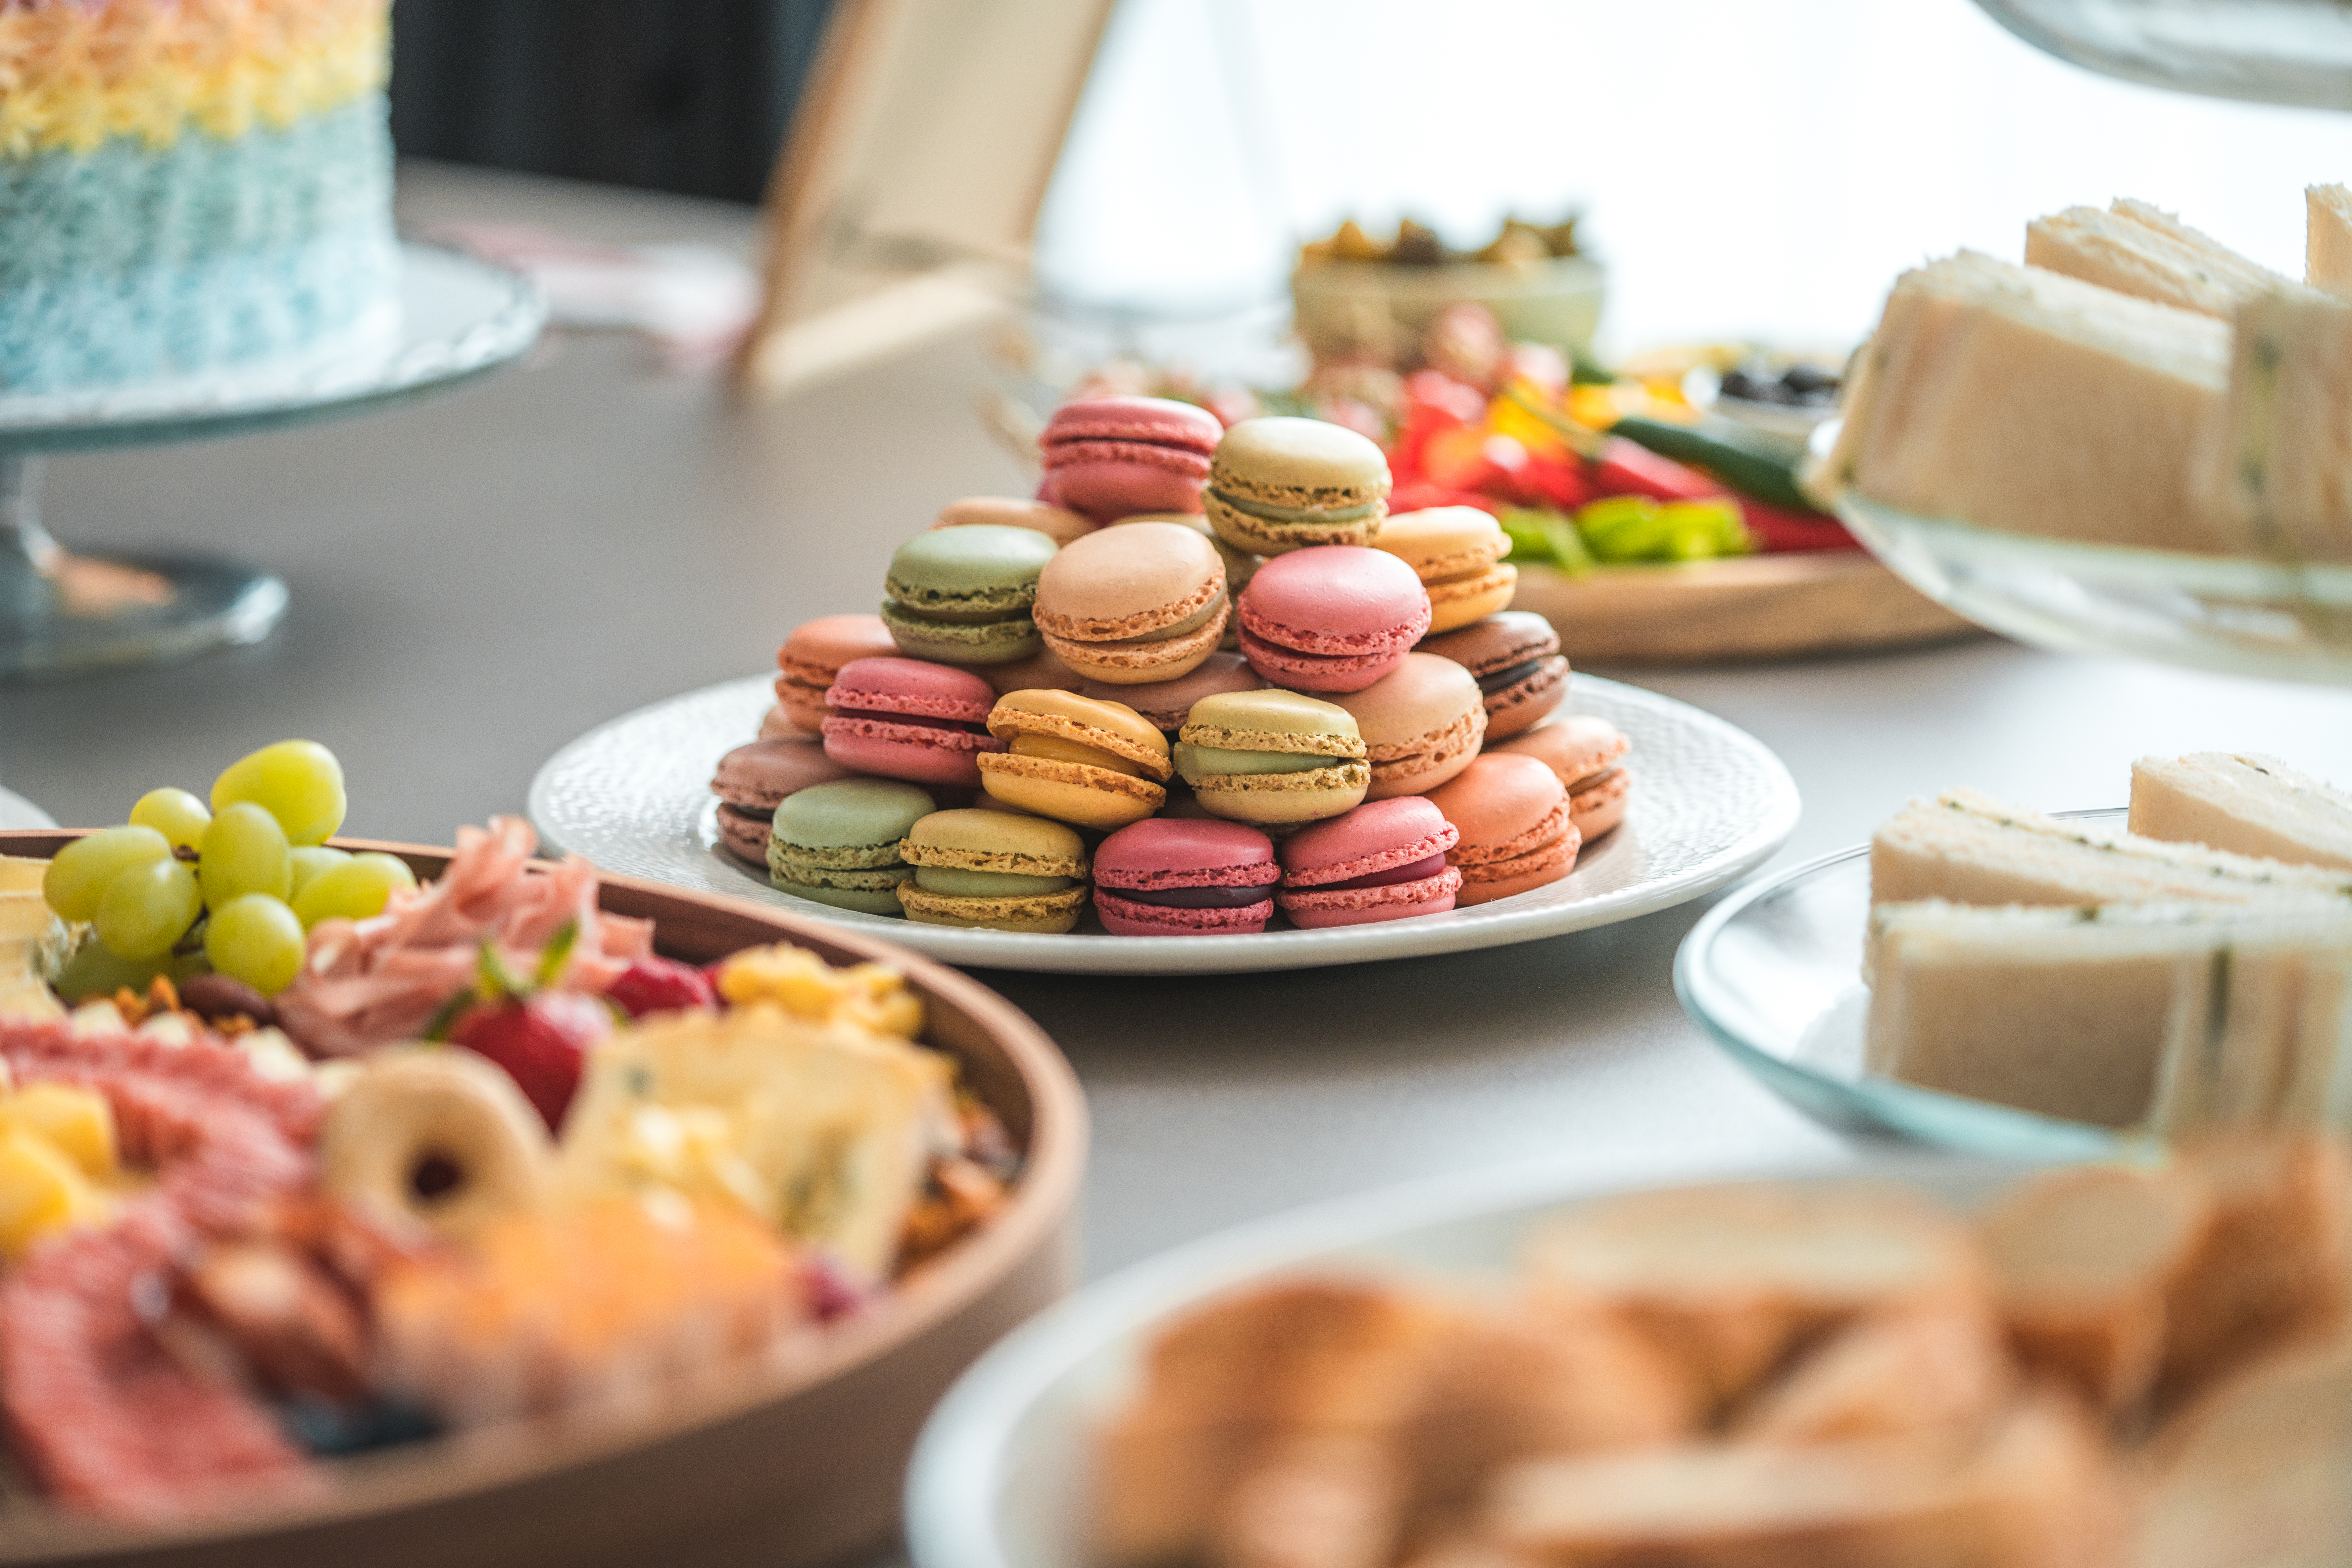 Assorted Macarons Adding Sweetness to Baby Shower Buffet | Source: Getty Images